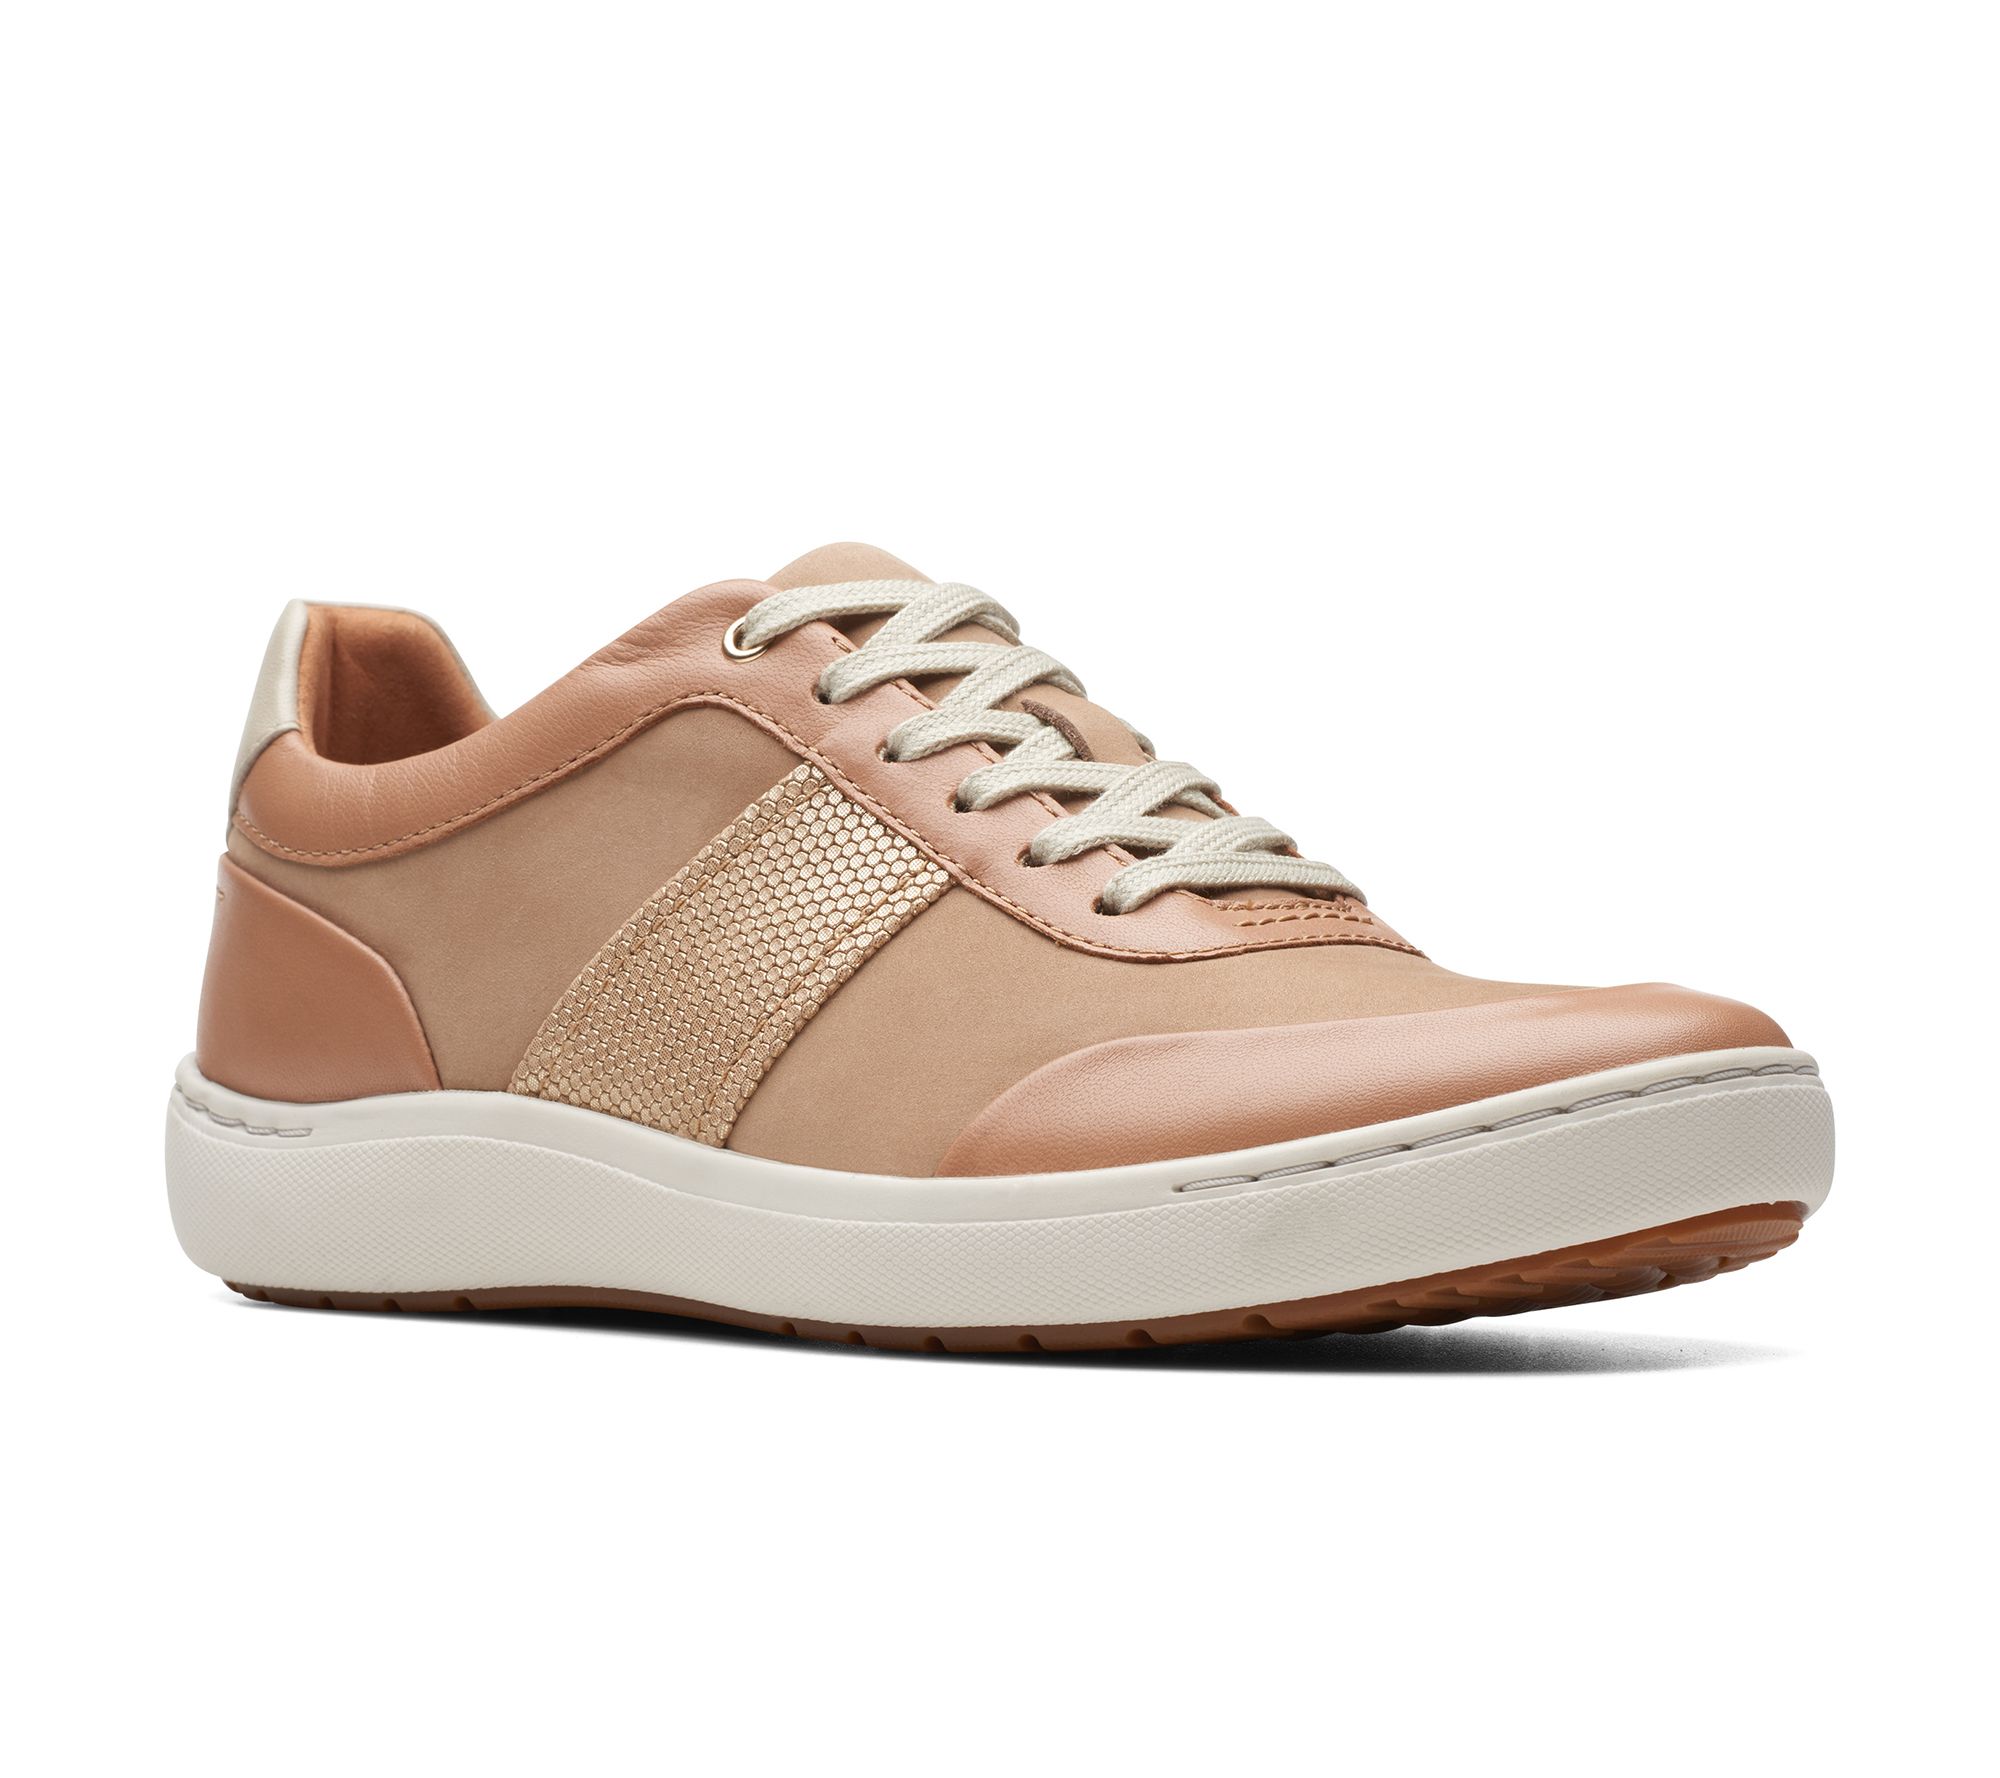 Clarks Lace-Up Leather Sneaker - Nalle Fern - QVC.com